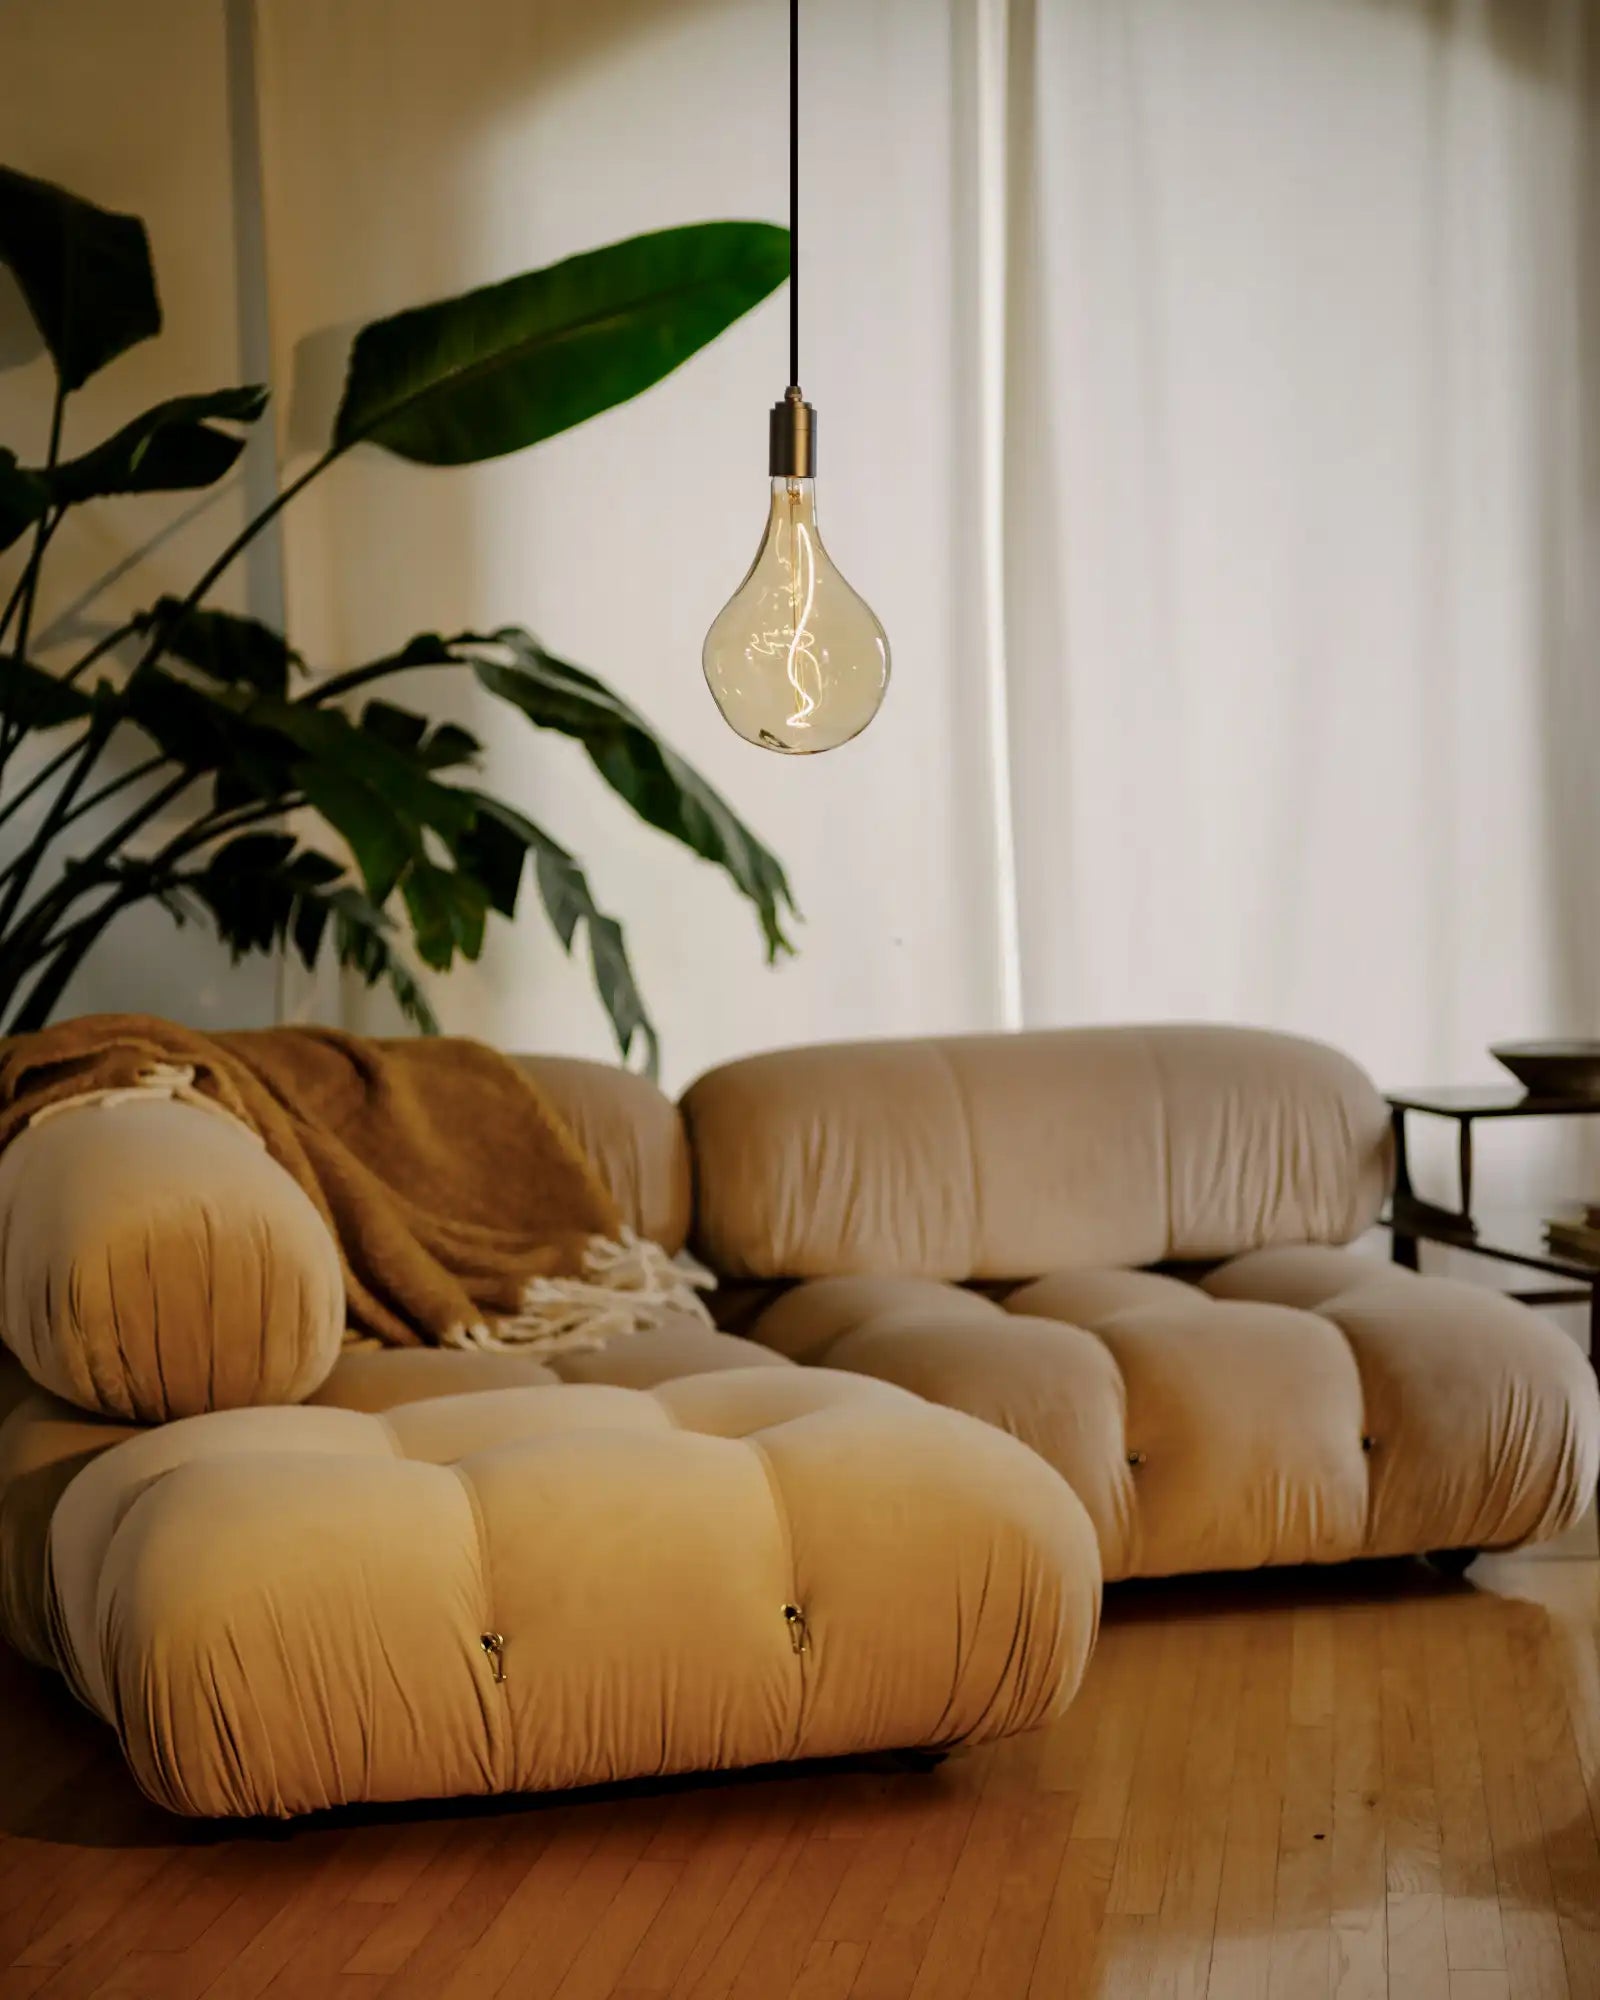 Voronoi Pendant Light by Tala featured within a Scandinavian living room | Nook Collections